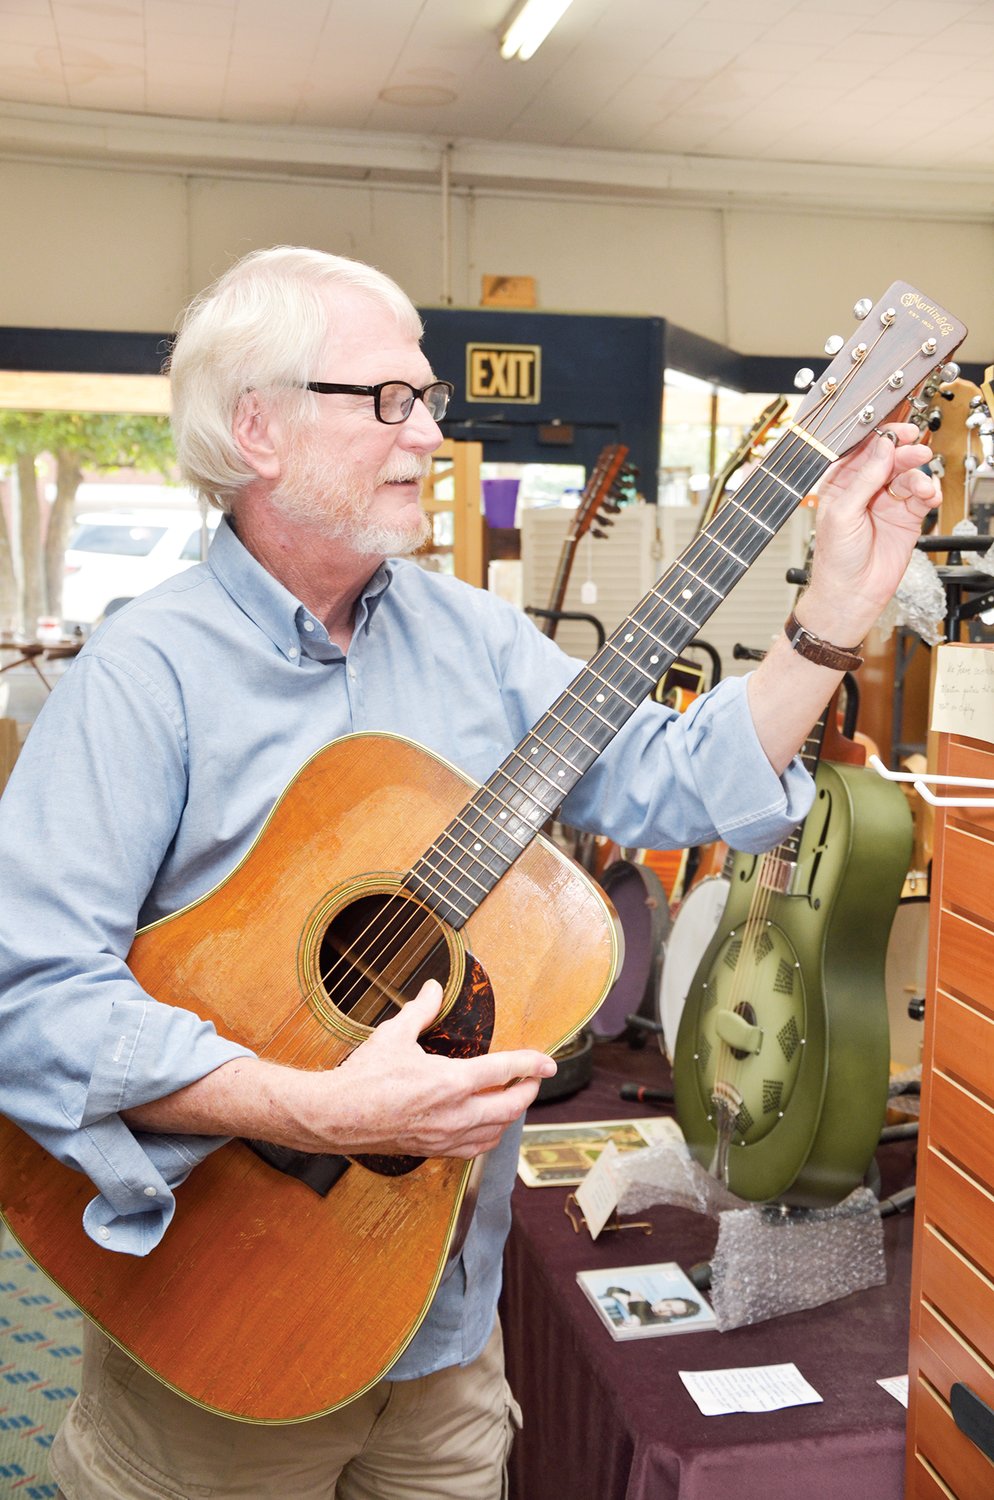 One of Tommy Edwards’ favorite instruments in his store on Hillsboro Street in Pittsboro is this classic 1950 Martin D-28. Other offerings in the store include a National Steel Resonator guitar, and other non-musical items such as silver, electric lamps from the 1930’s, and other decorative items.